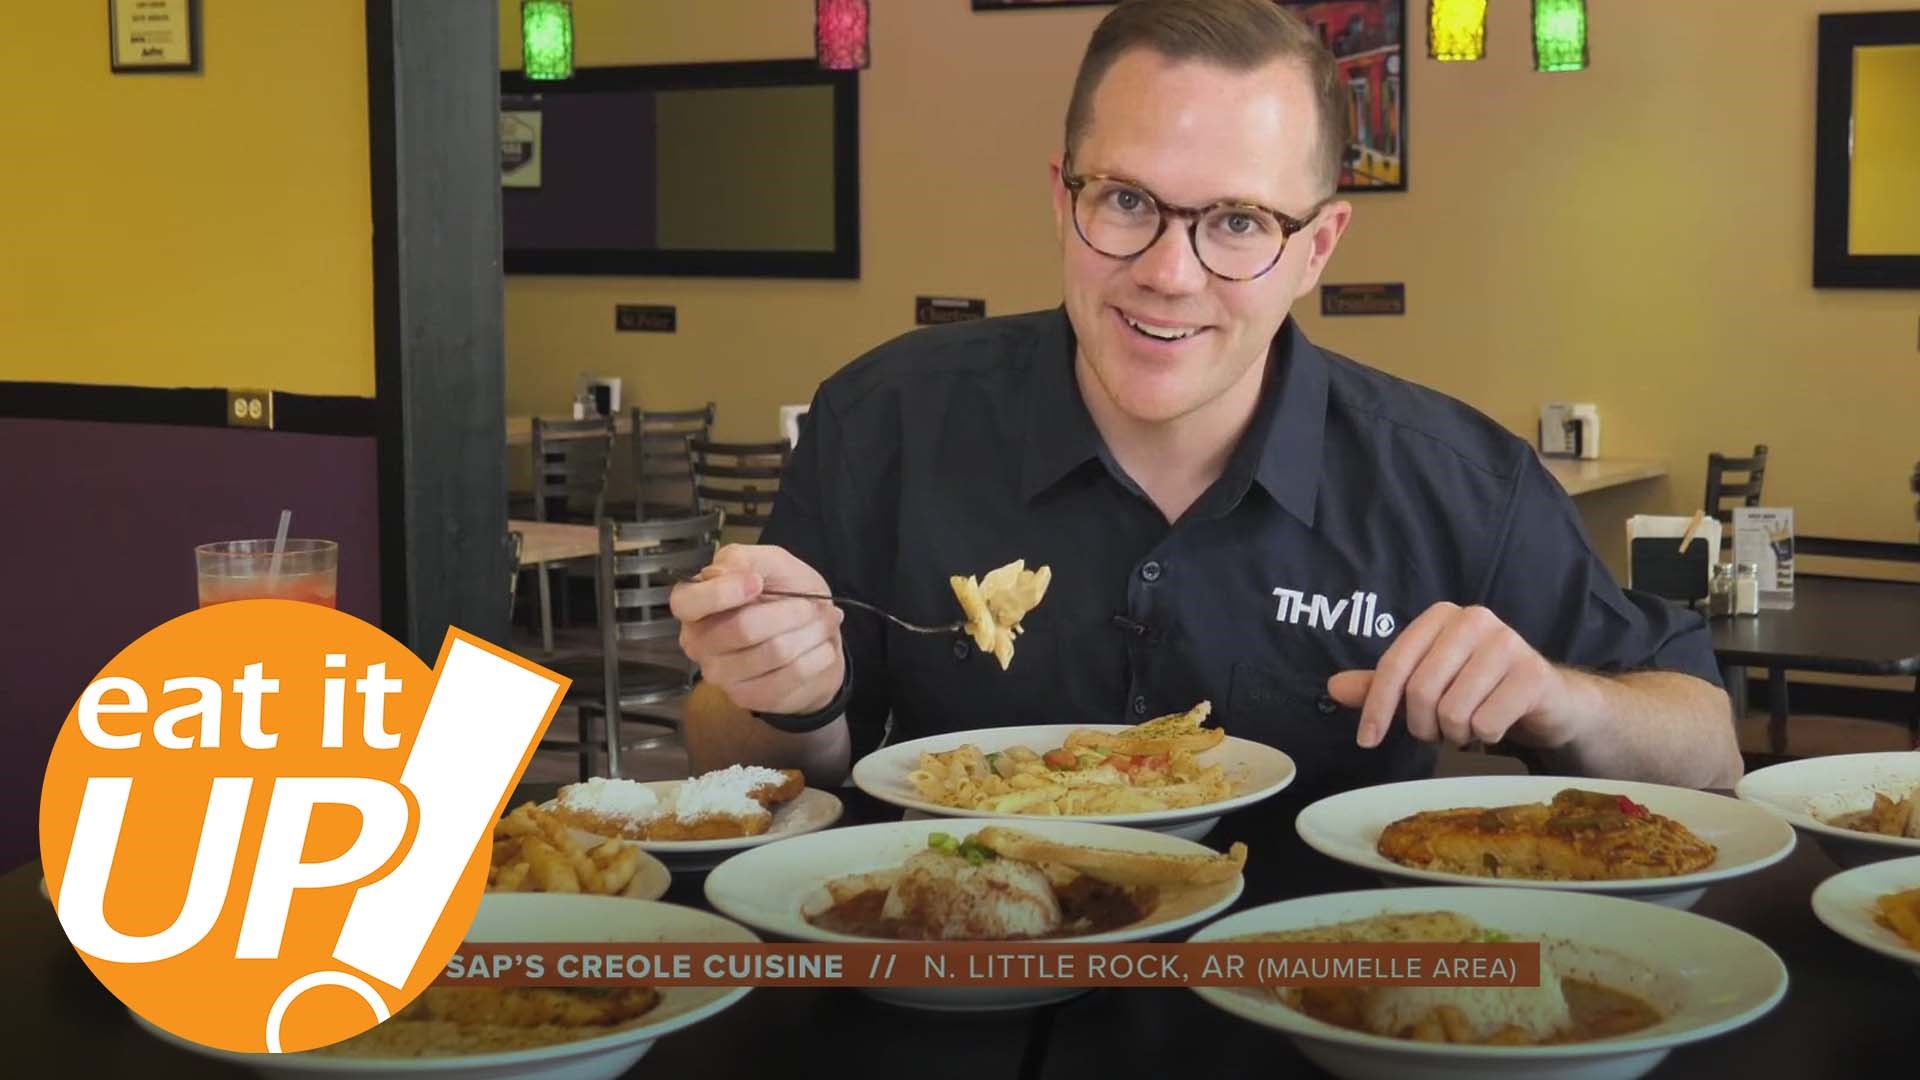 On this week's Eat It Up, Skot Covert visits Sap's Creole Cuisine, a restaurant bringing authentic New Orleans flavor & flair to the North Little Rock/Maumelle area.